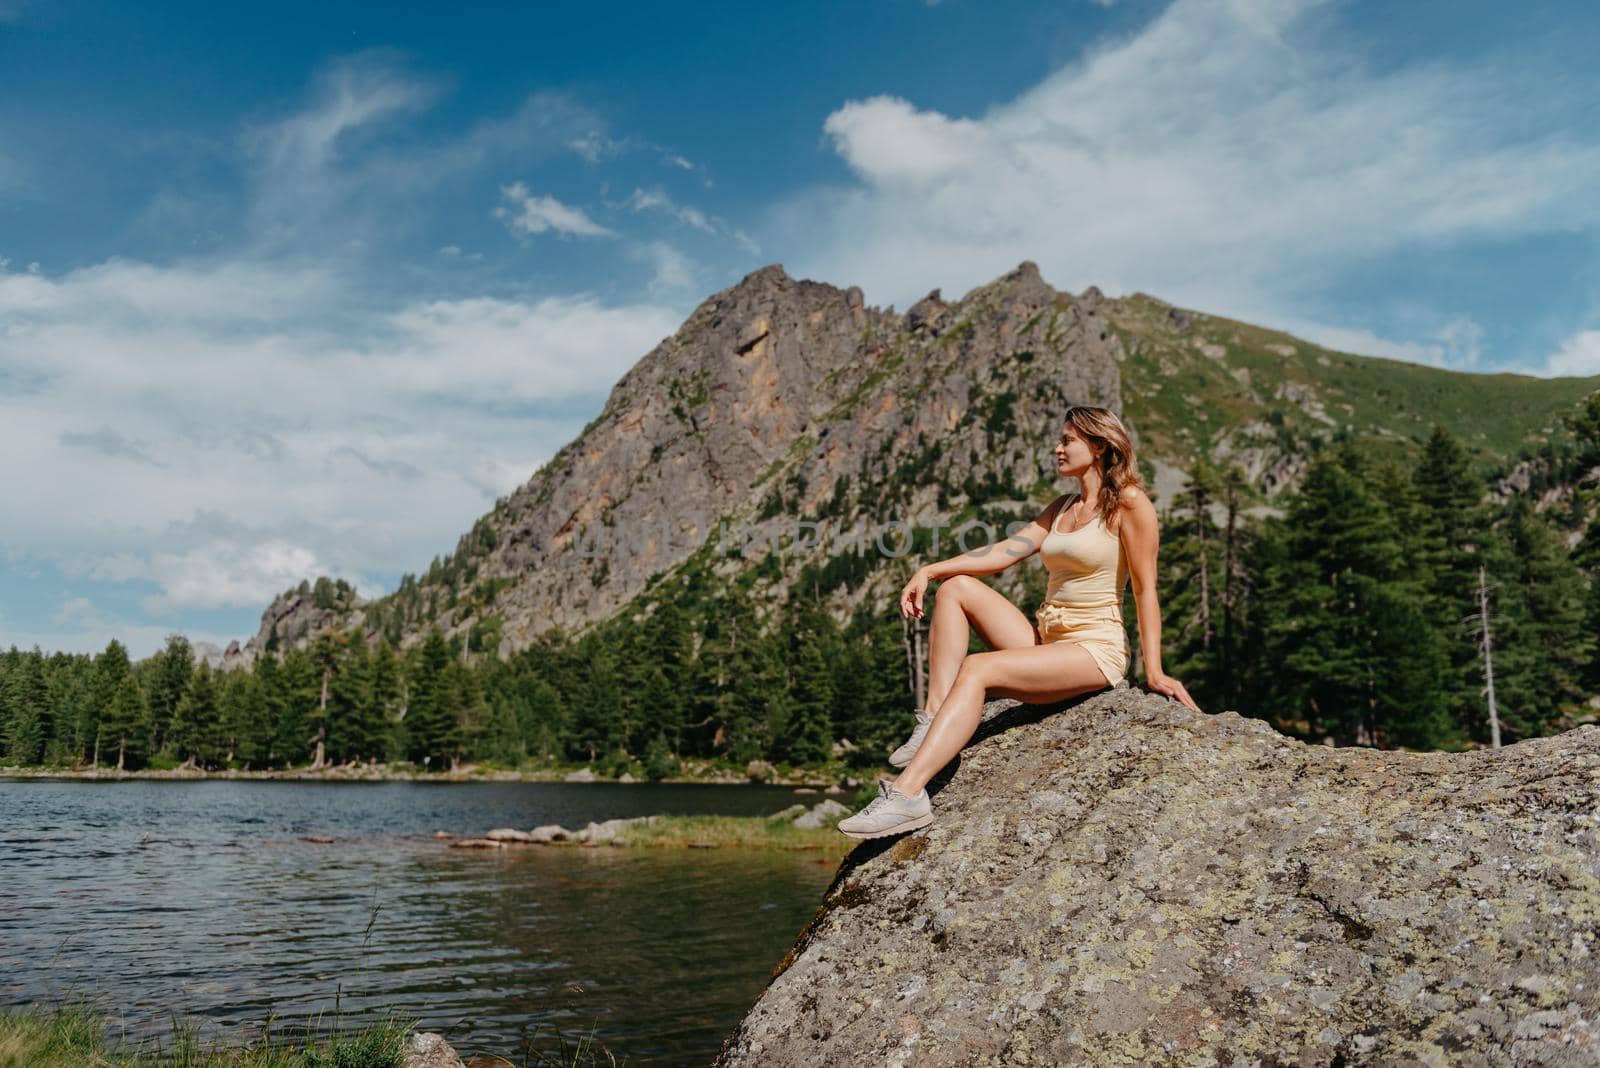 Tourist girl enjoys the magical view of the lake, coniferous forest and magical view sitting on big stone on the shore of a turquoise lake in the mountains. Hiking in the Natural Park. Cute girl tourist sitting on a large stone by the lake. The water is clear, stones are visible under the water. by Andrii_Ko